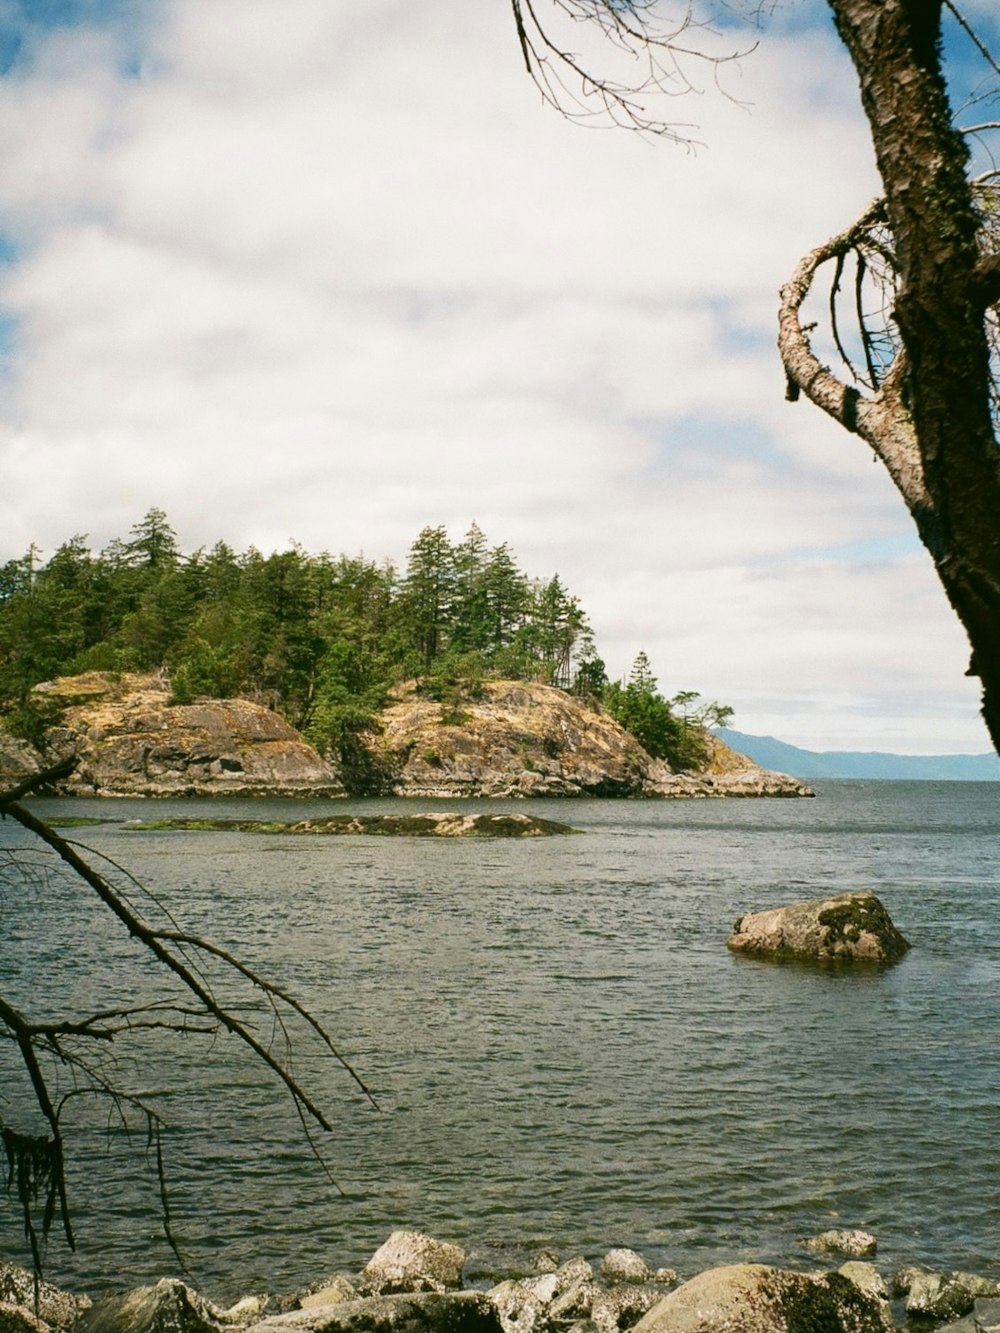 a rocky beach with trees and a body of water